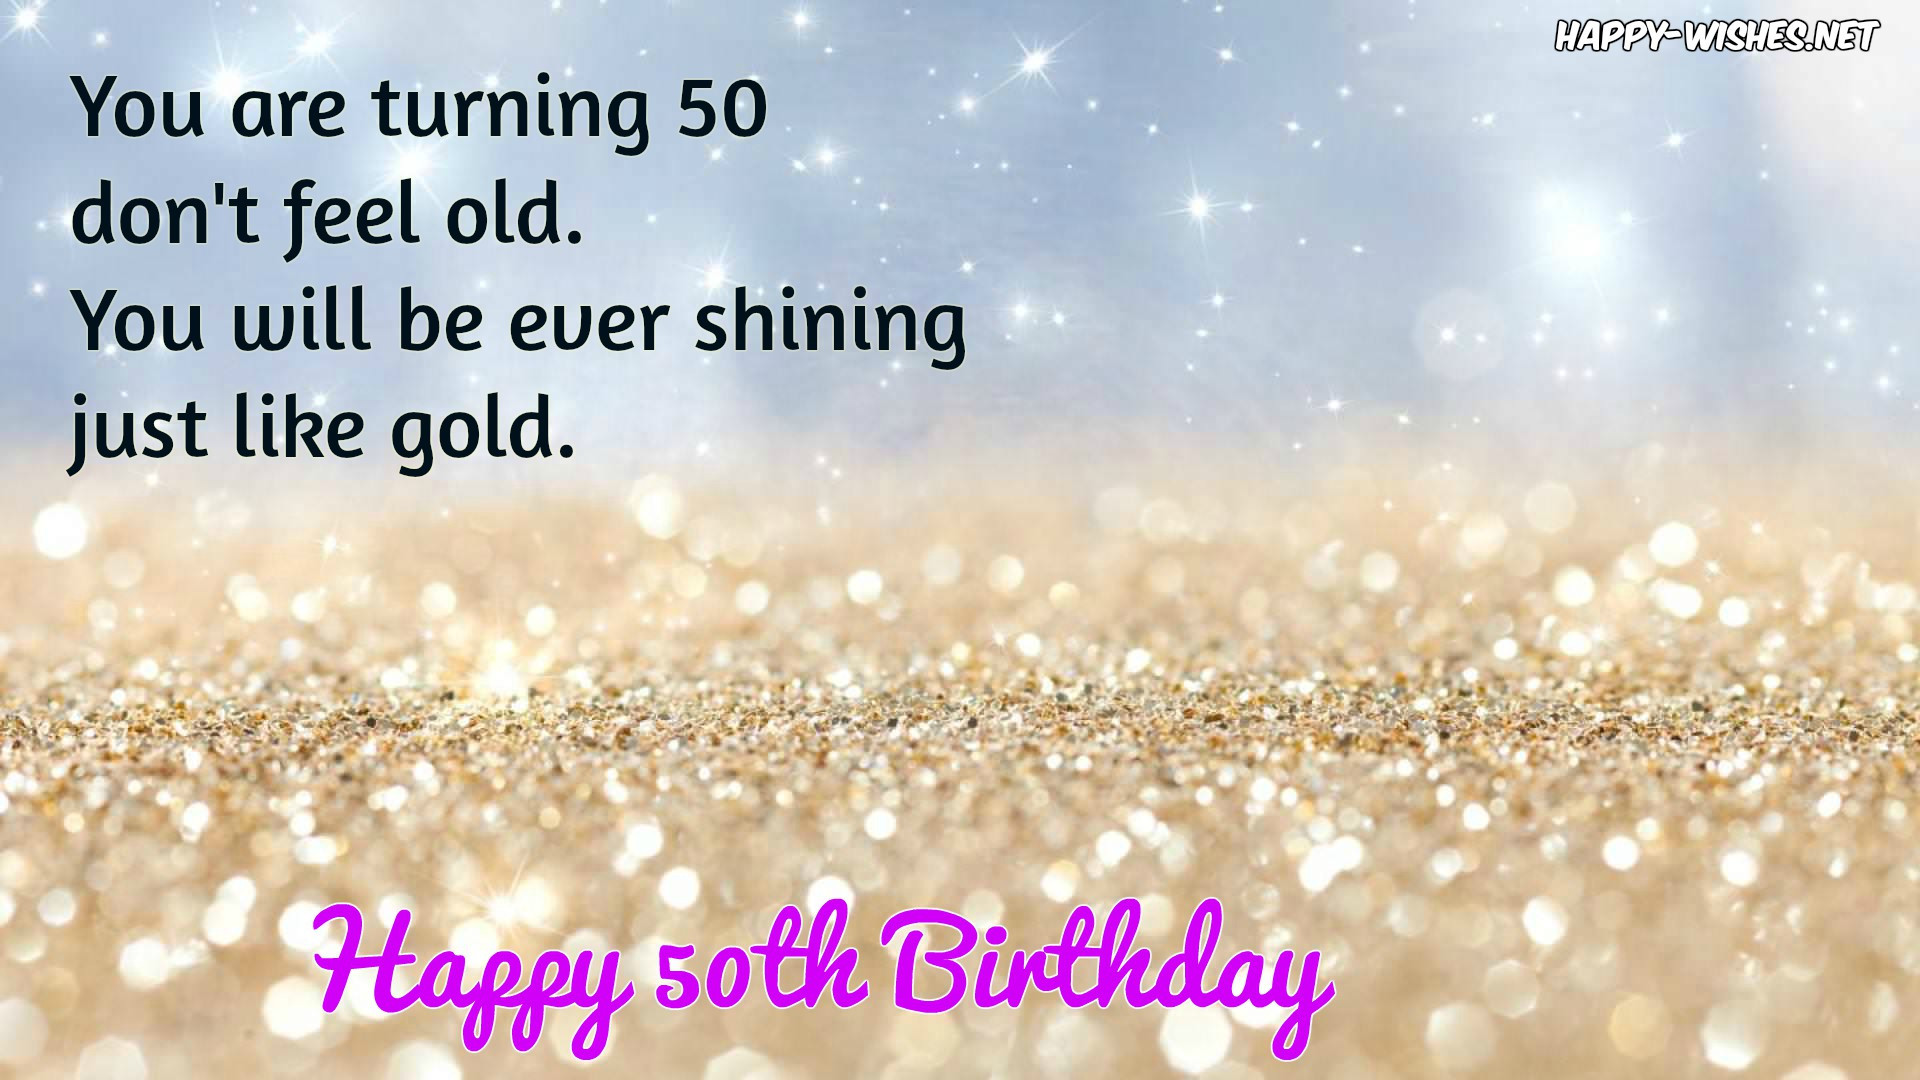 Quotes For 50Th Birthday Woman
 Happy 50th Birthday wishes Quotes & images